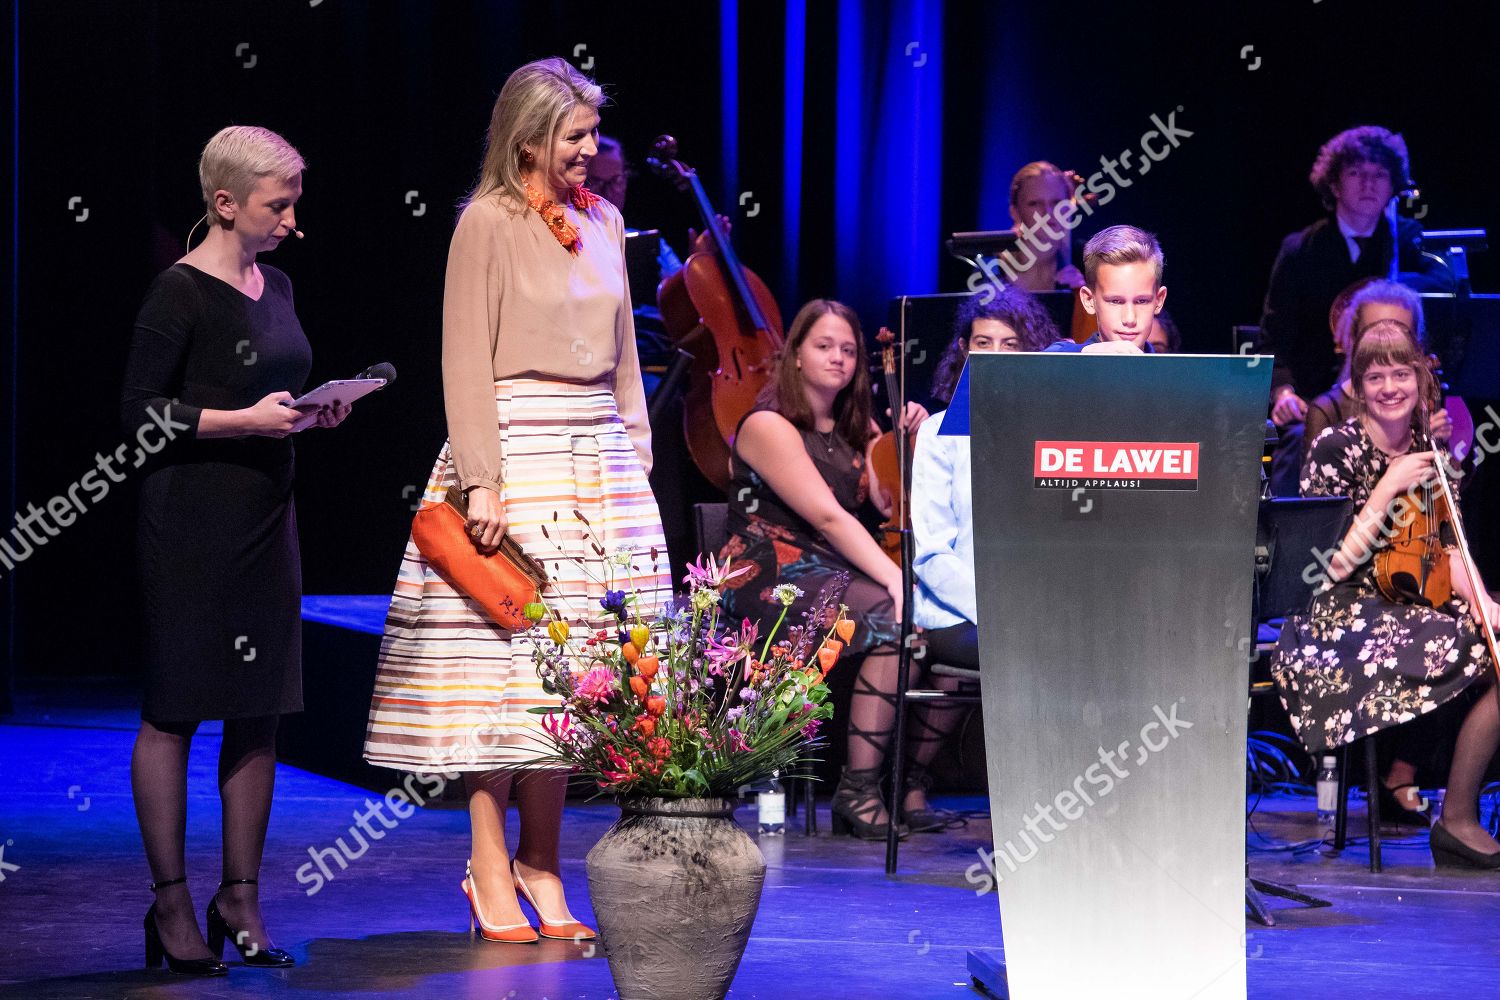 signing-of-the-cooperation-agreement-for-music-education-drachten-the-netherlands-shutterstock-editorial-9887703d.jpg